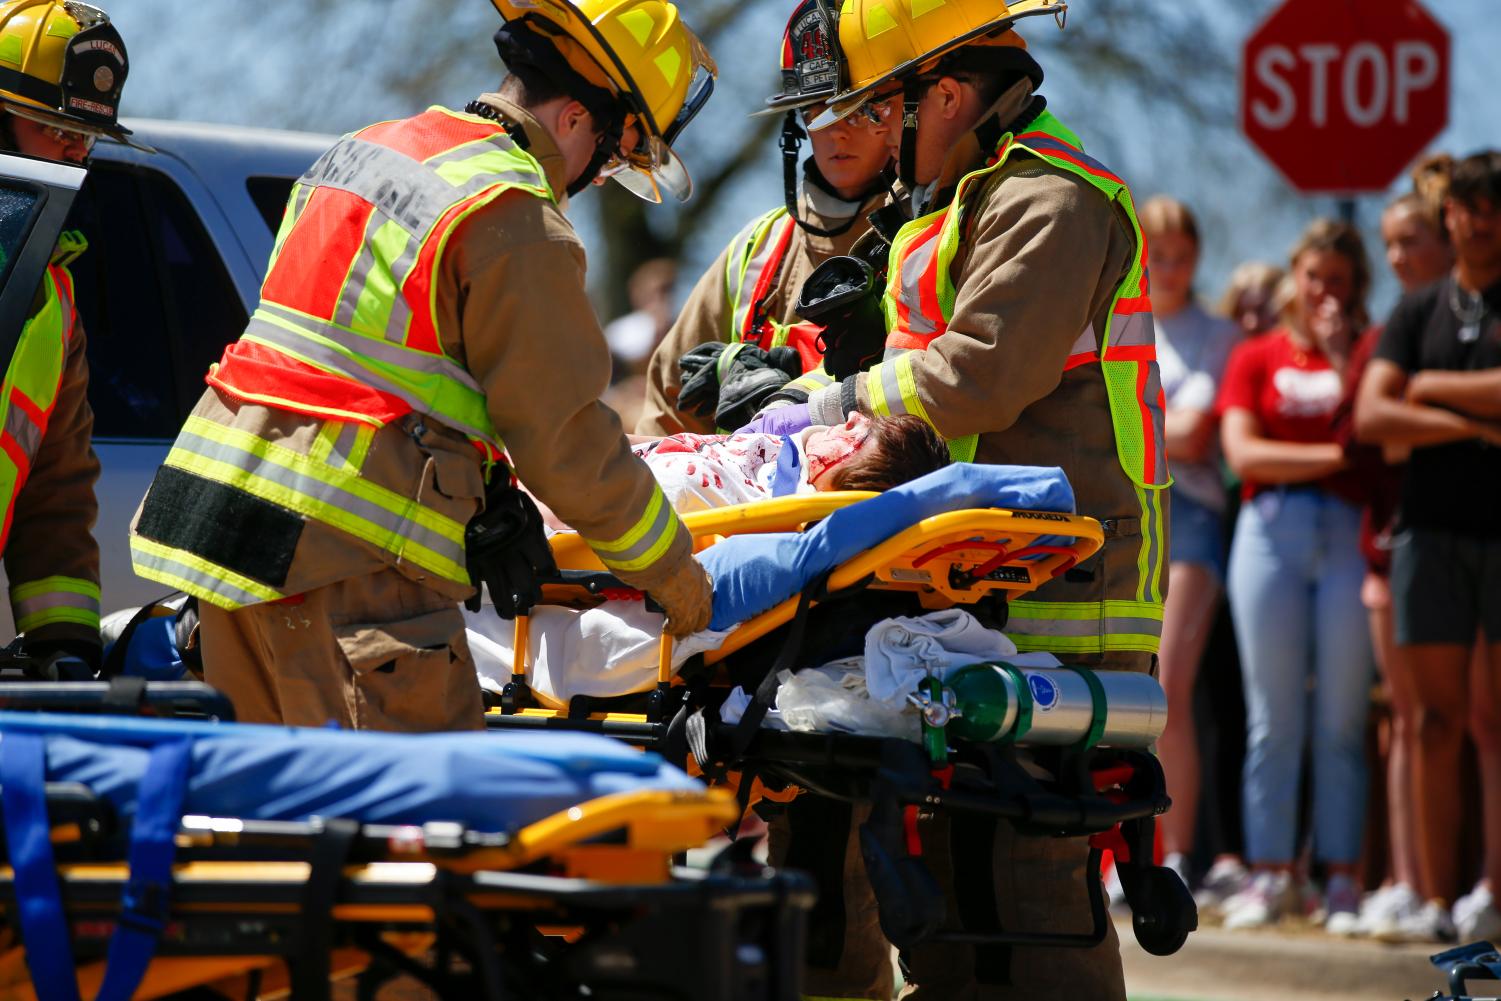 Senior Aidan Abramson gets carried out by paramedics. Abramson was one of the students who passed away in the accident.